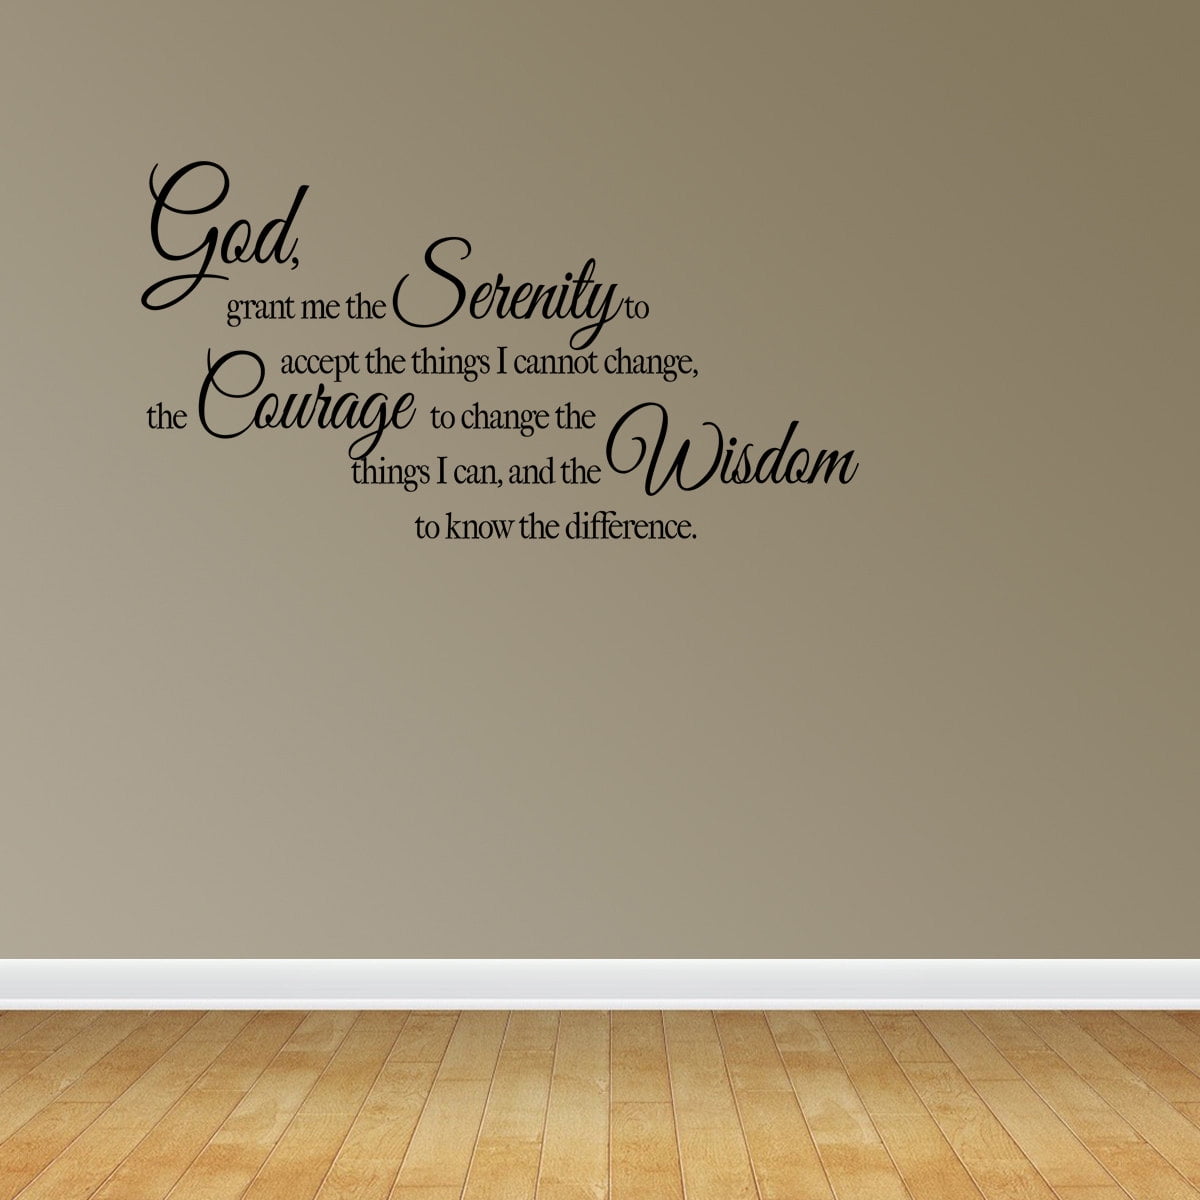 the courage to change things i can and the wisdom to know the difference serenity prayer Wall Art Vinyl Lettering Decal Sticker Saying God grant me the serenity to accept things I can not change 